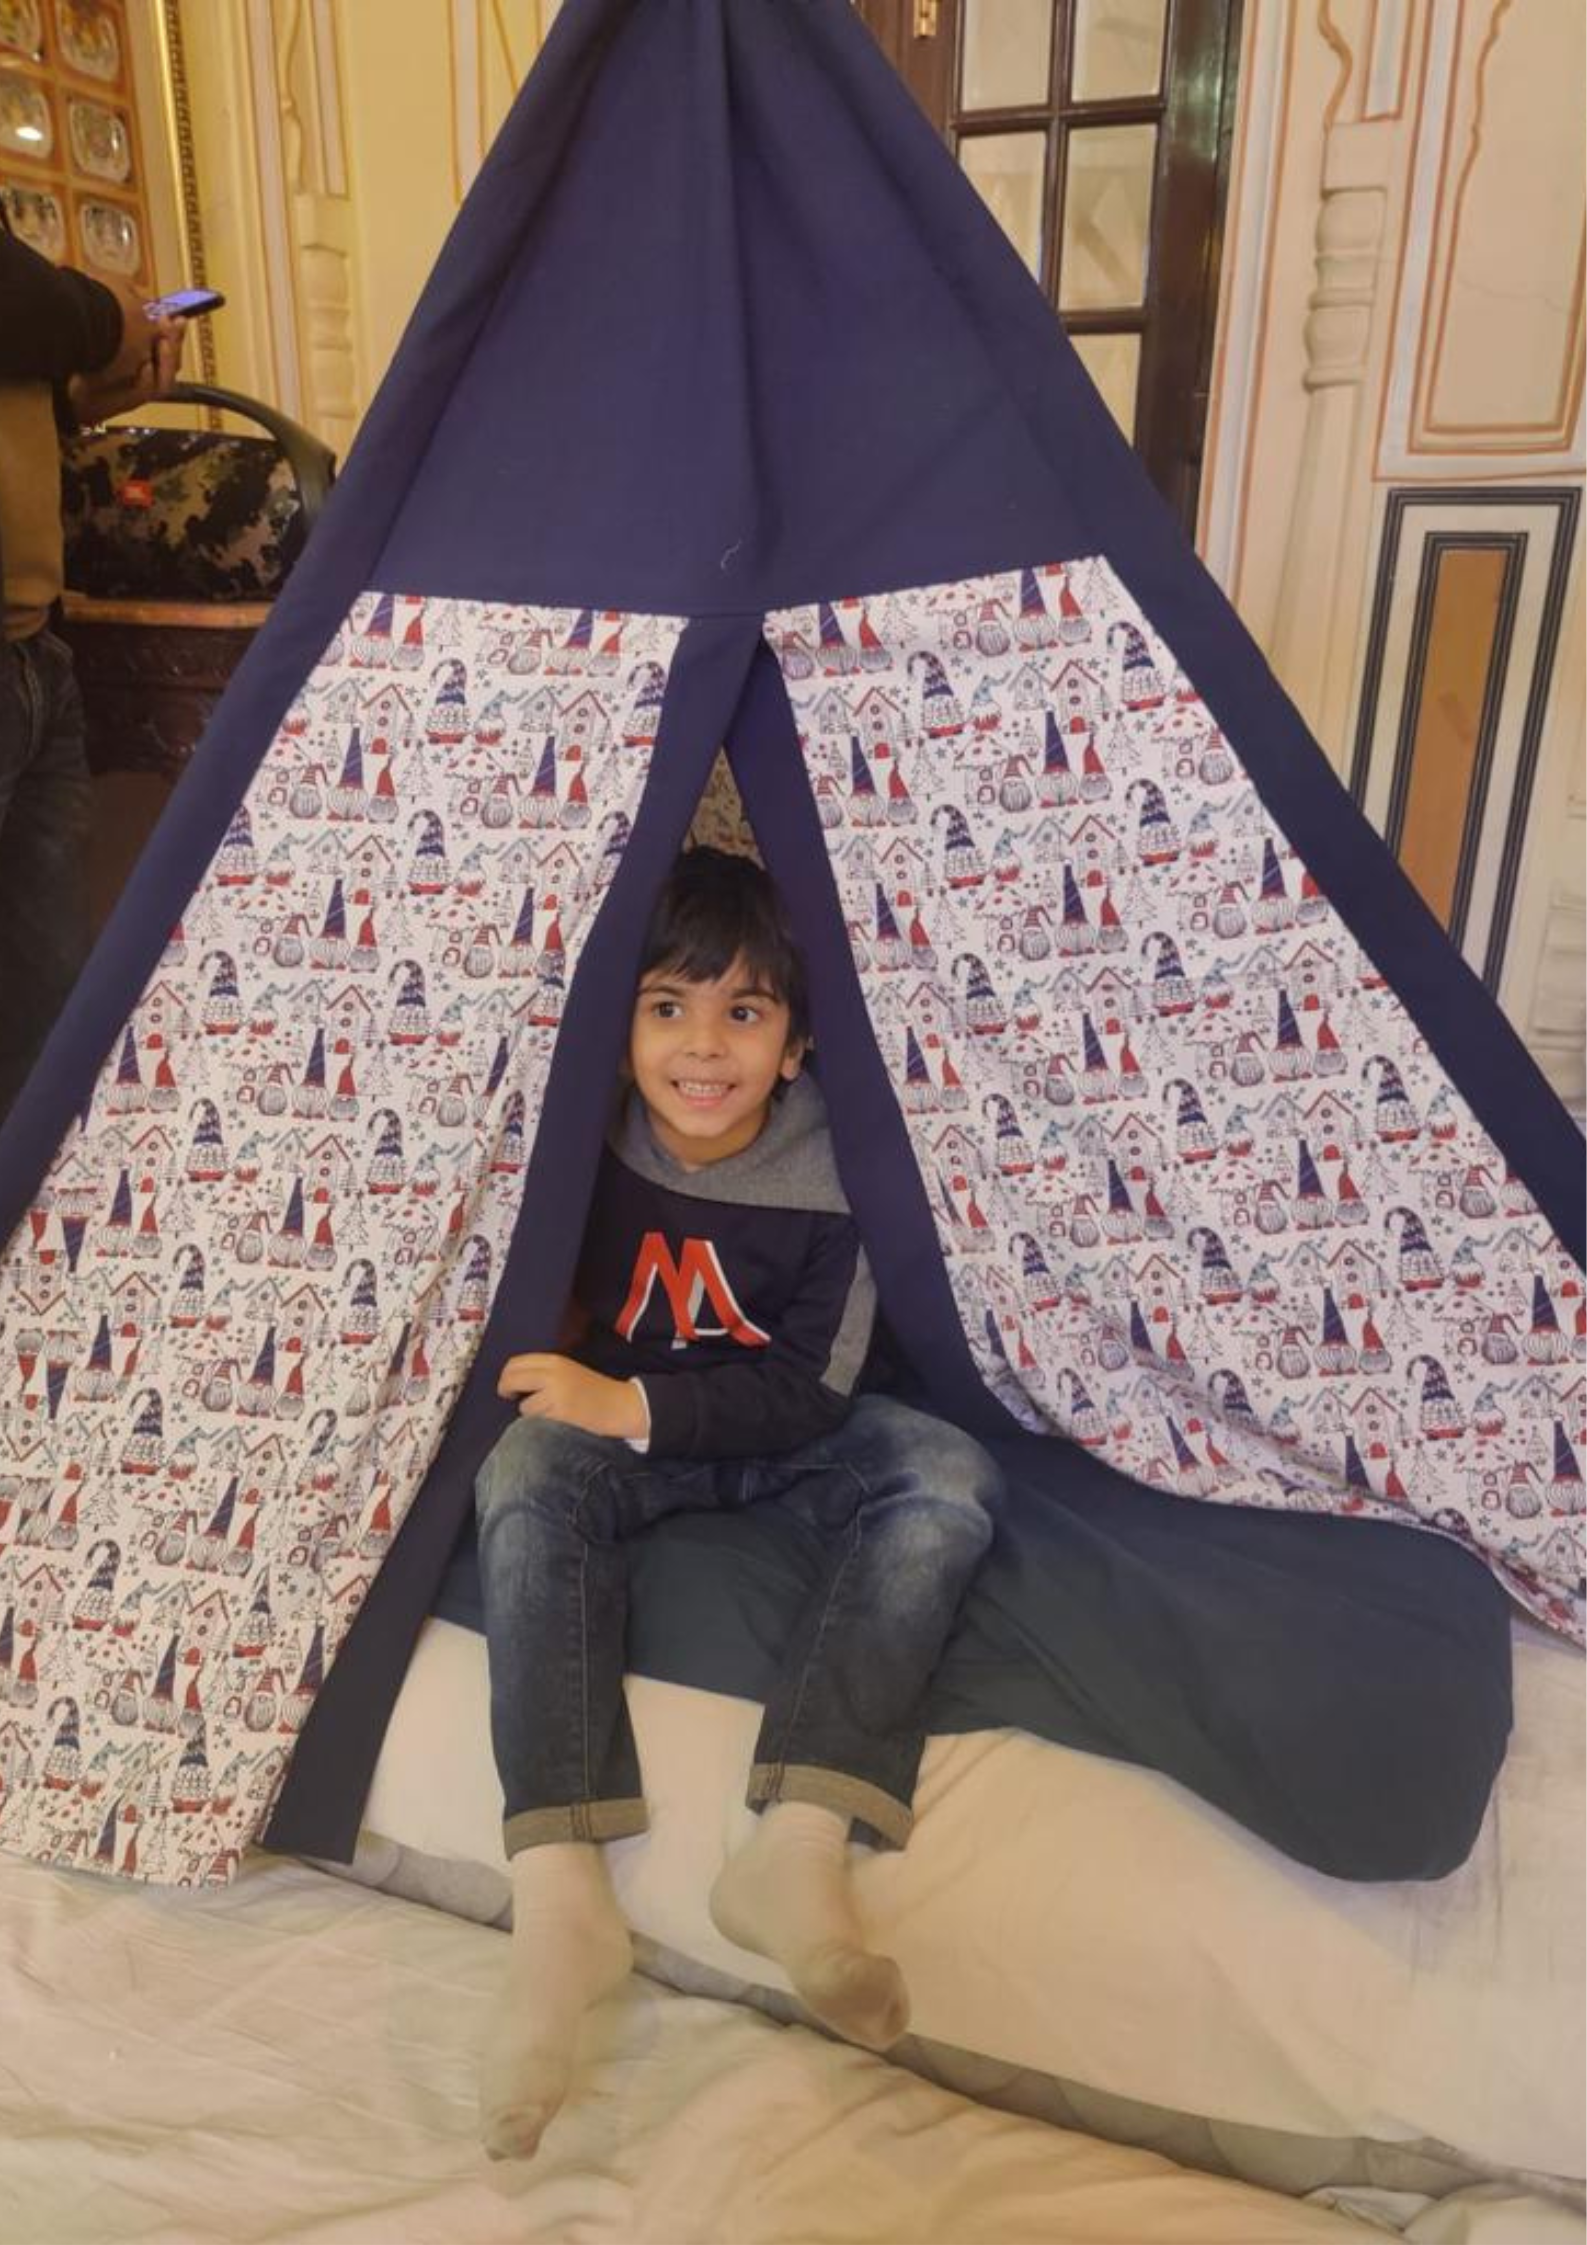 Teepee Tent for Kids